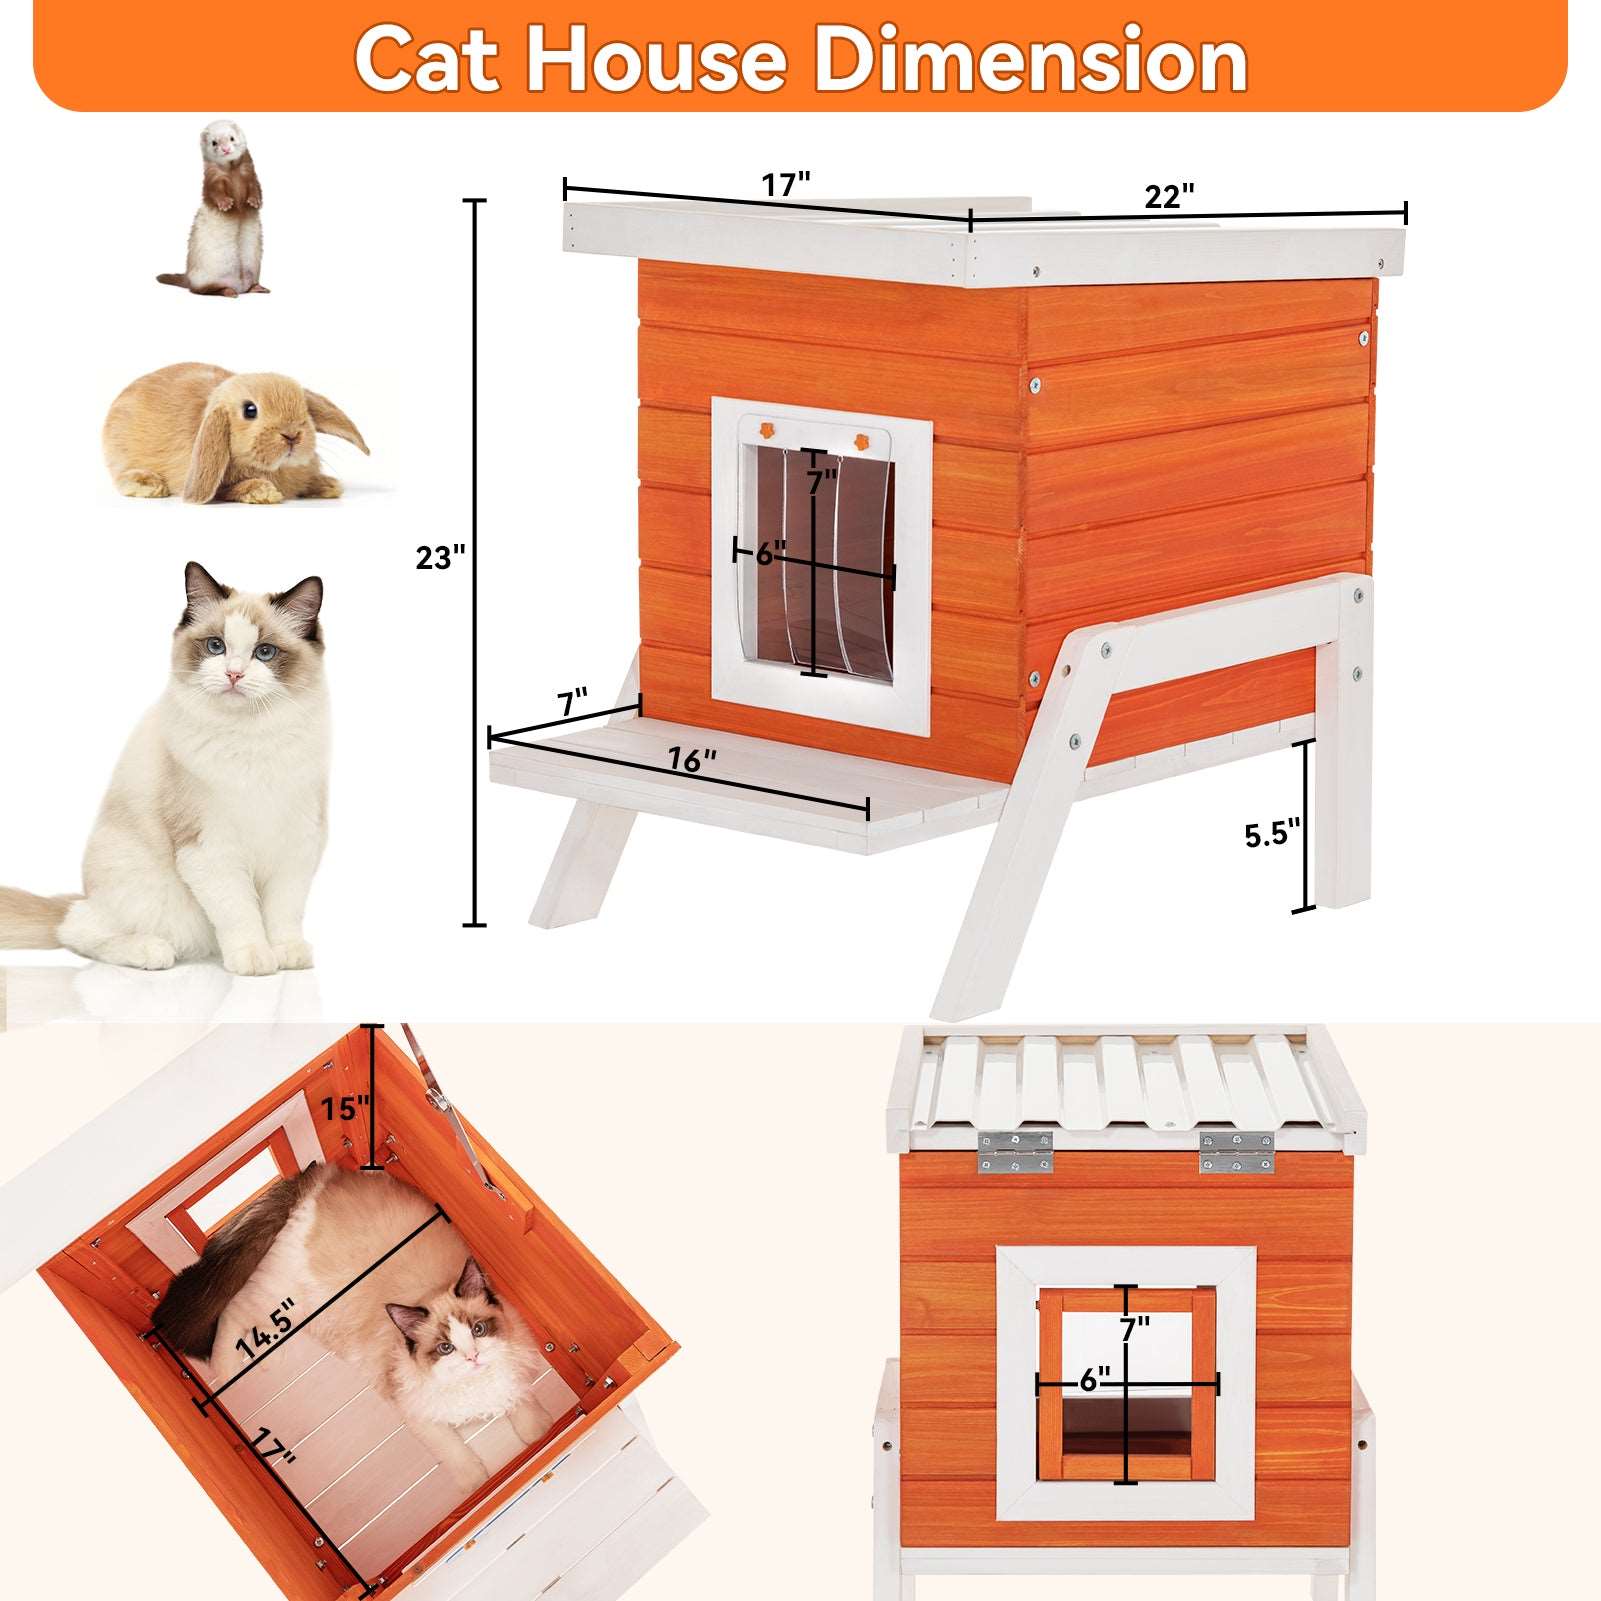 petsfit-cat-house-outdoor-insulated-high-feet-feeding-station-door-curtain-wood-outside-cat-house-bunny-rabbit-hutch-orange-02